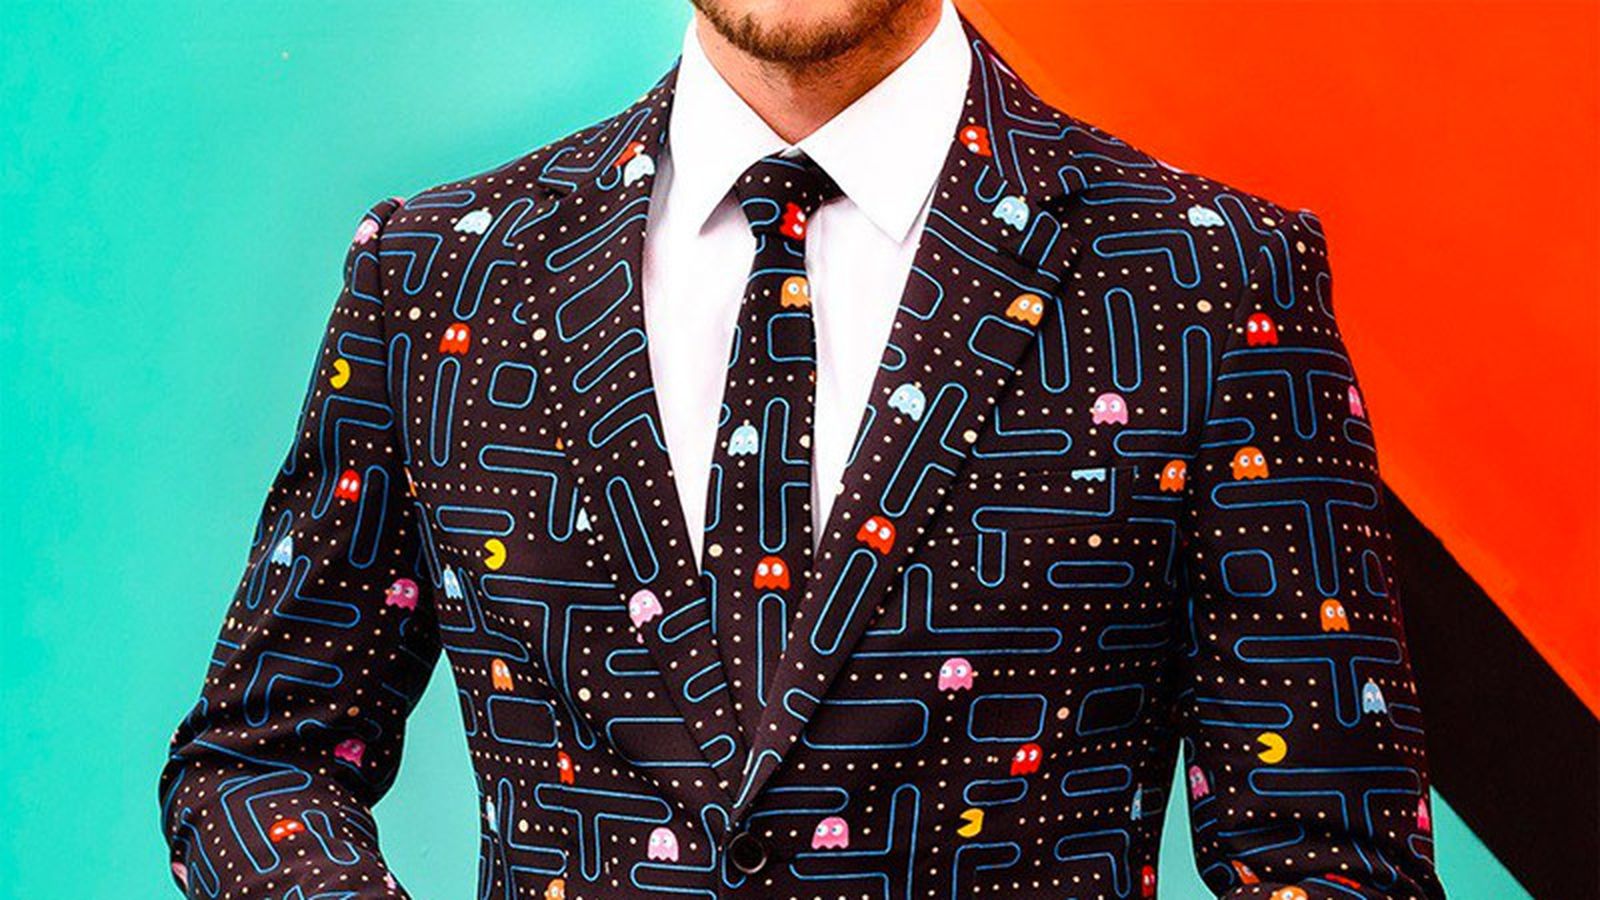 pac man suit.0.0.jpg.0 - The Persistent Popularity Of Retro Video Games